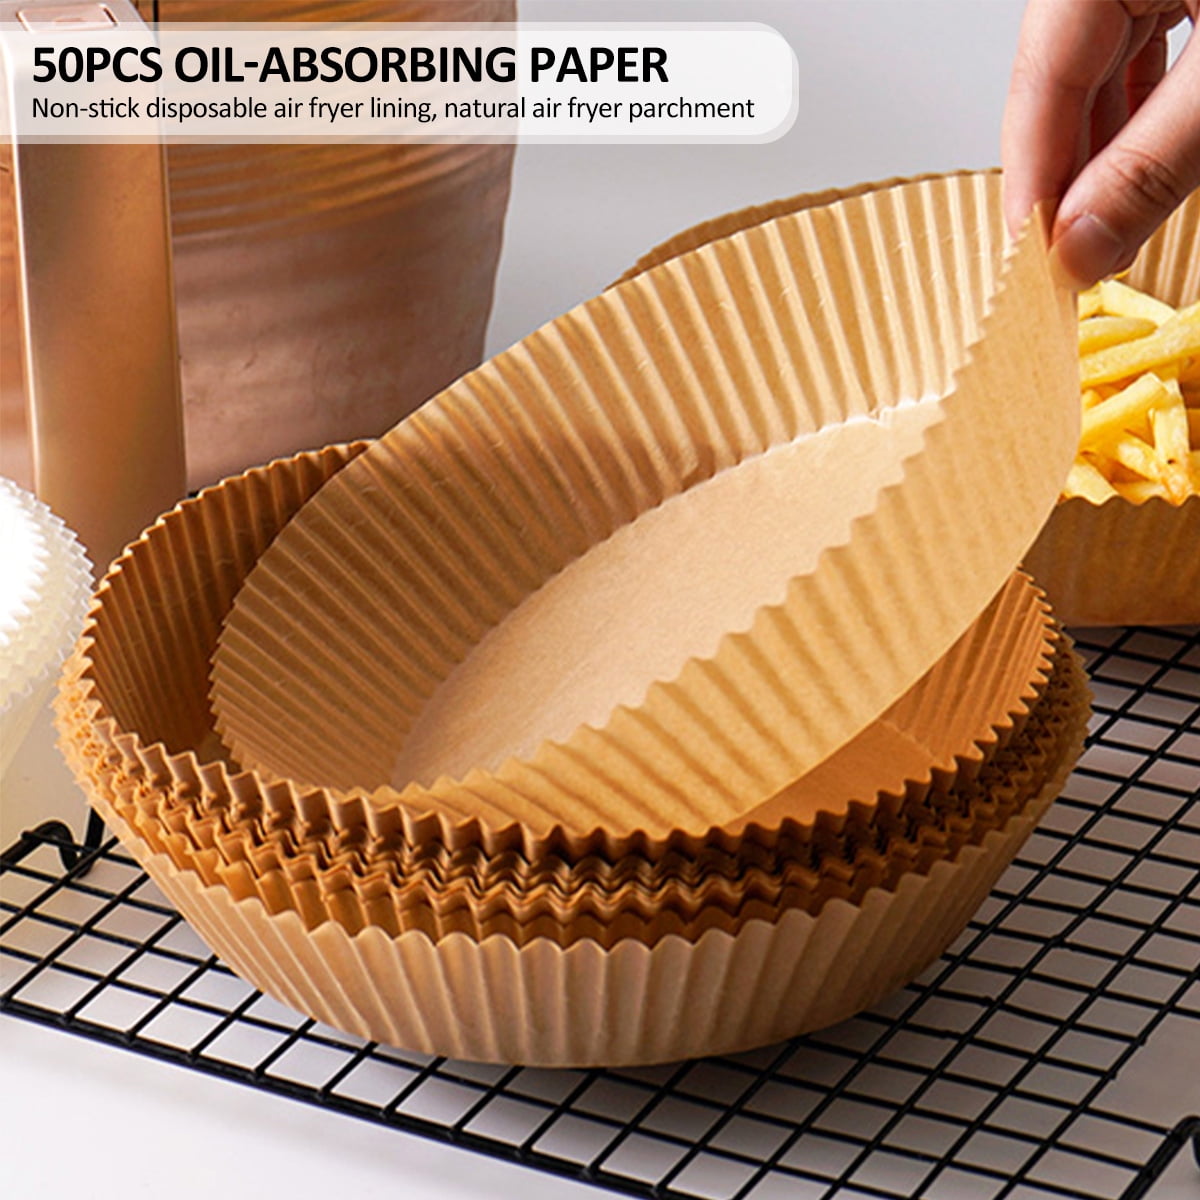 FUNGWAHOO Air Fryer Paper Liners,120Pcs Parchment Paper Sheets,Air Fryer Disposable Food Basket Paper Liner for Microwave, Non-Stick Air Fryer